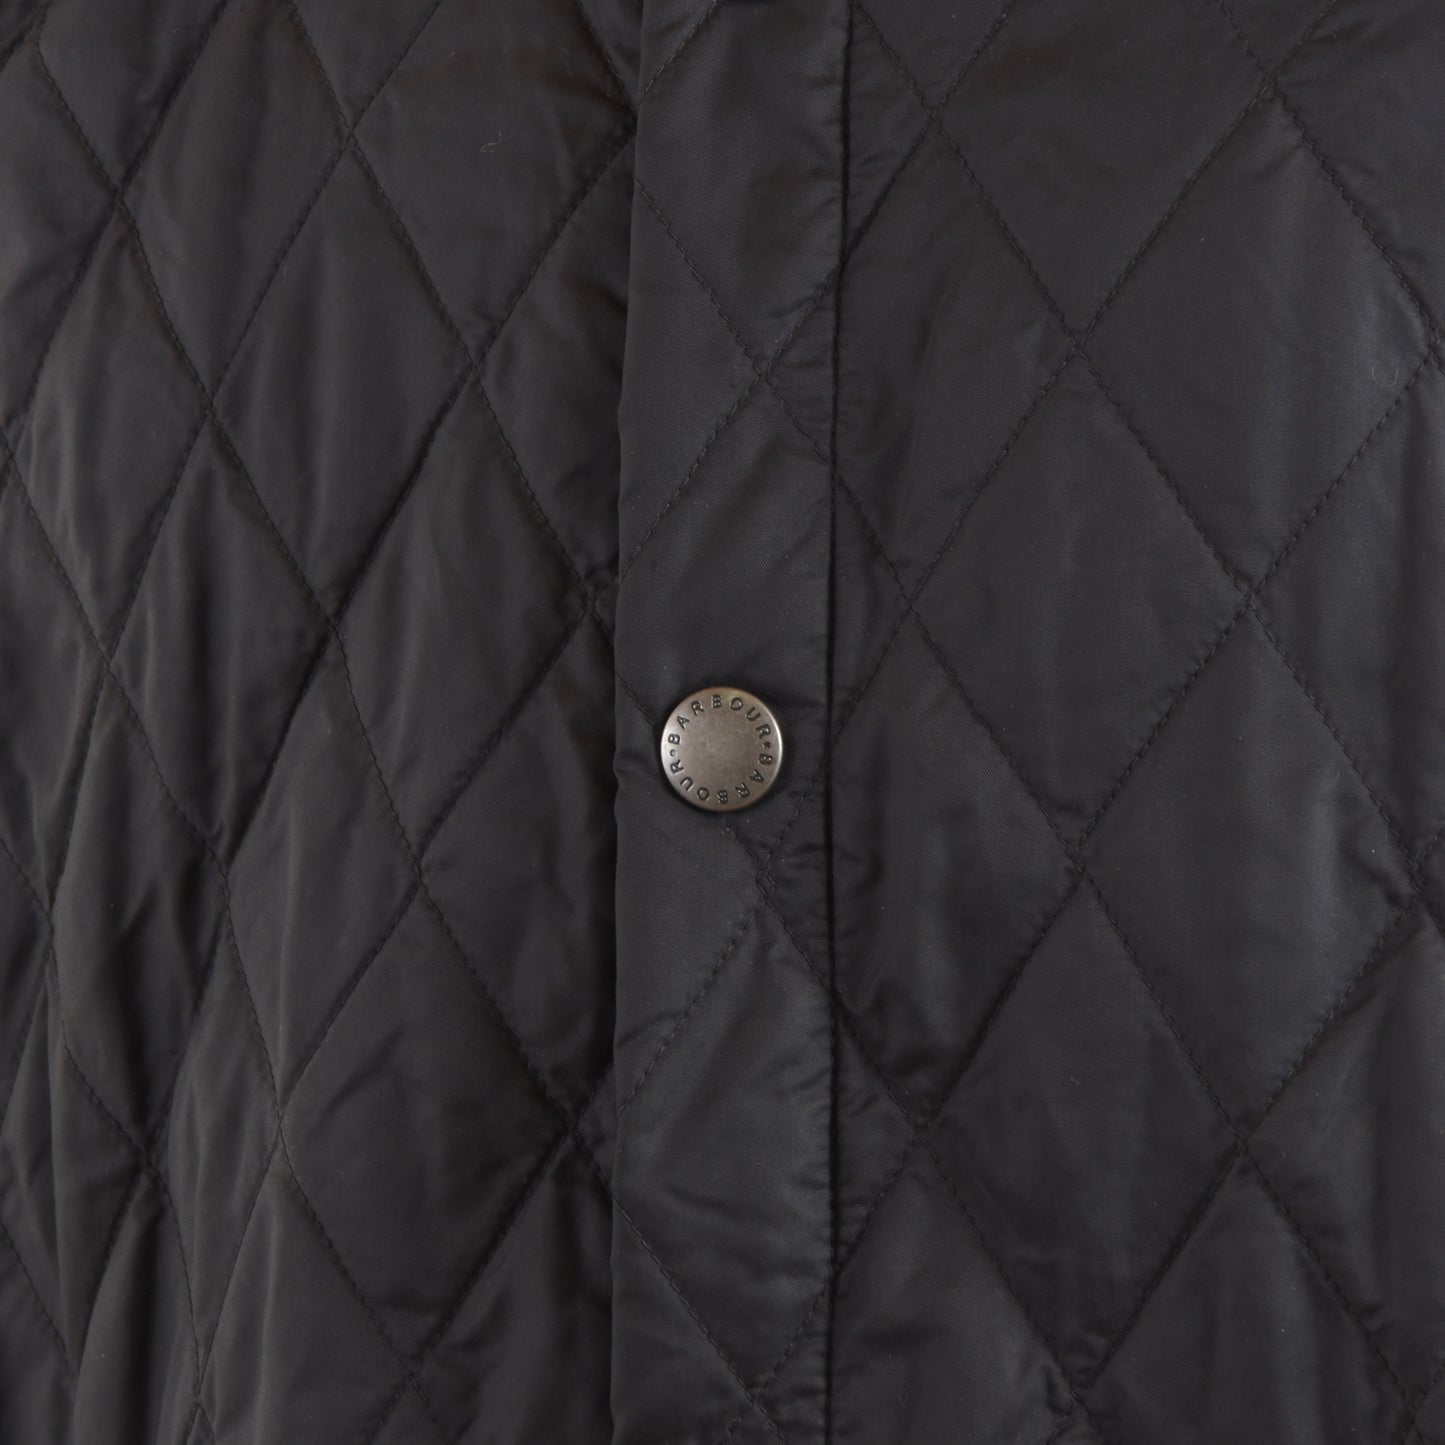 Barbour Lightweight Liddesdale Quilted Jacket Size XL - Charcoal/Grey